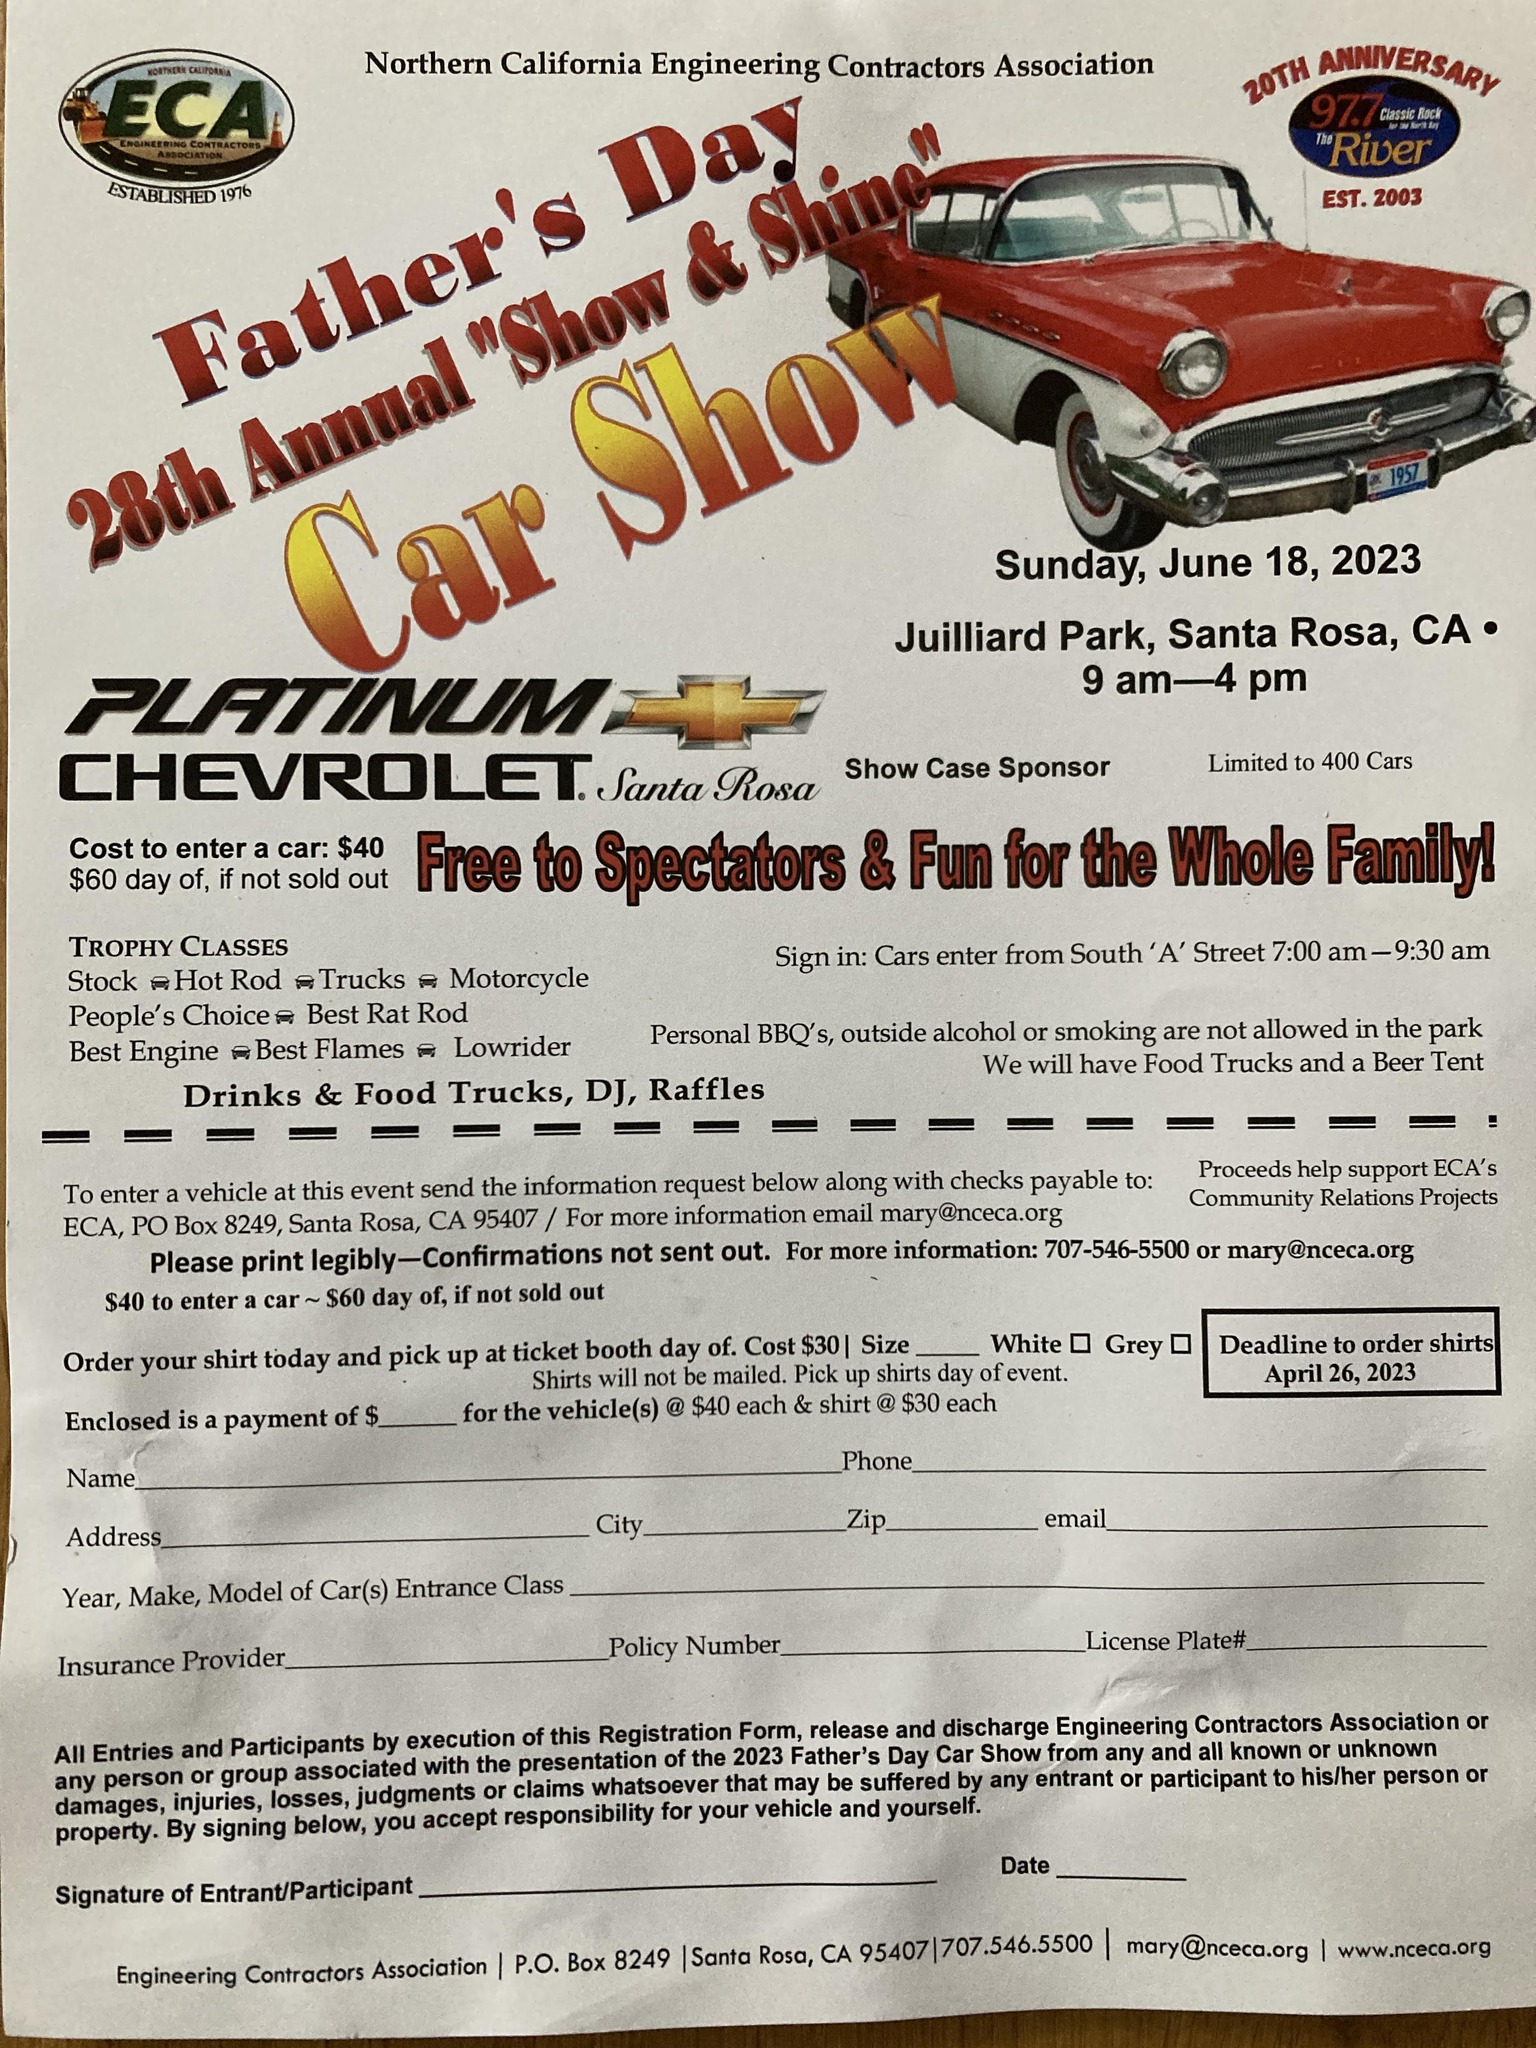 Father's Day "Show and Shine" Car Show